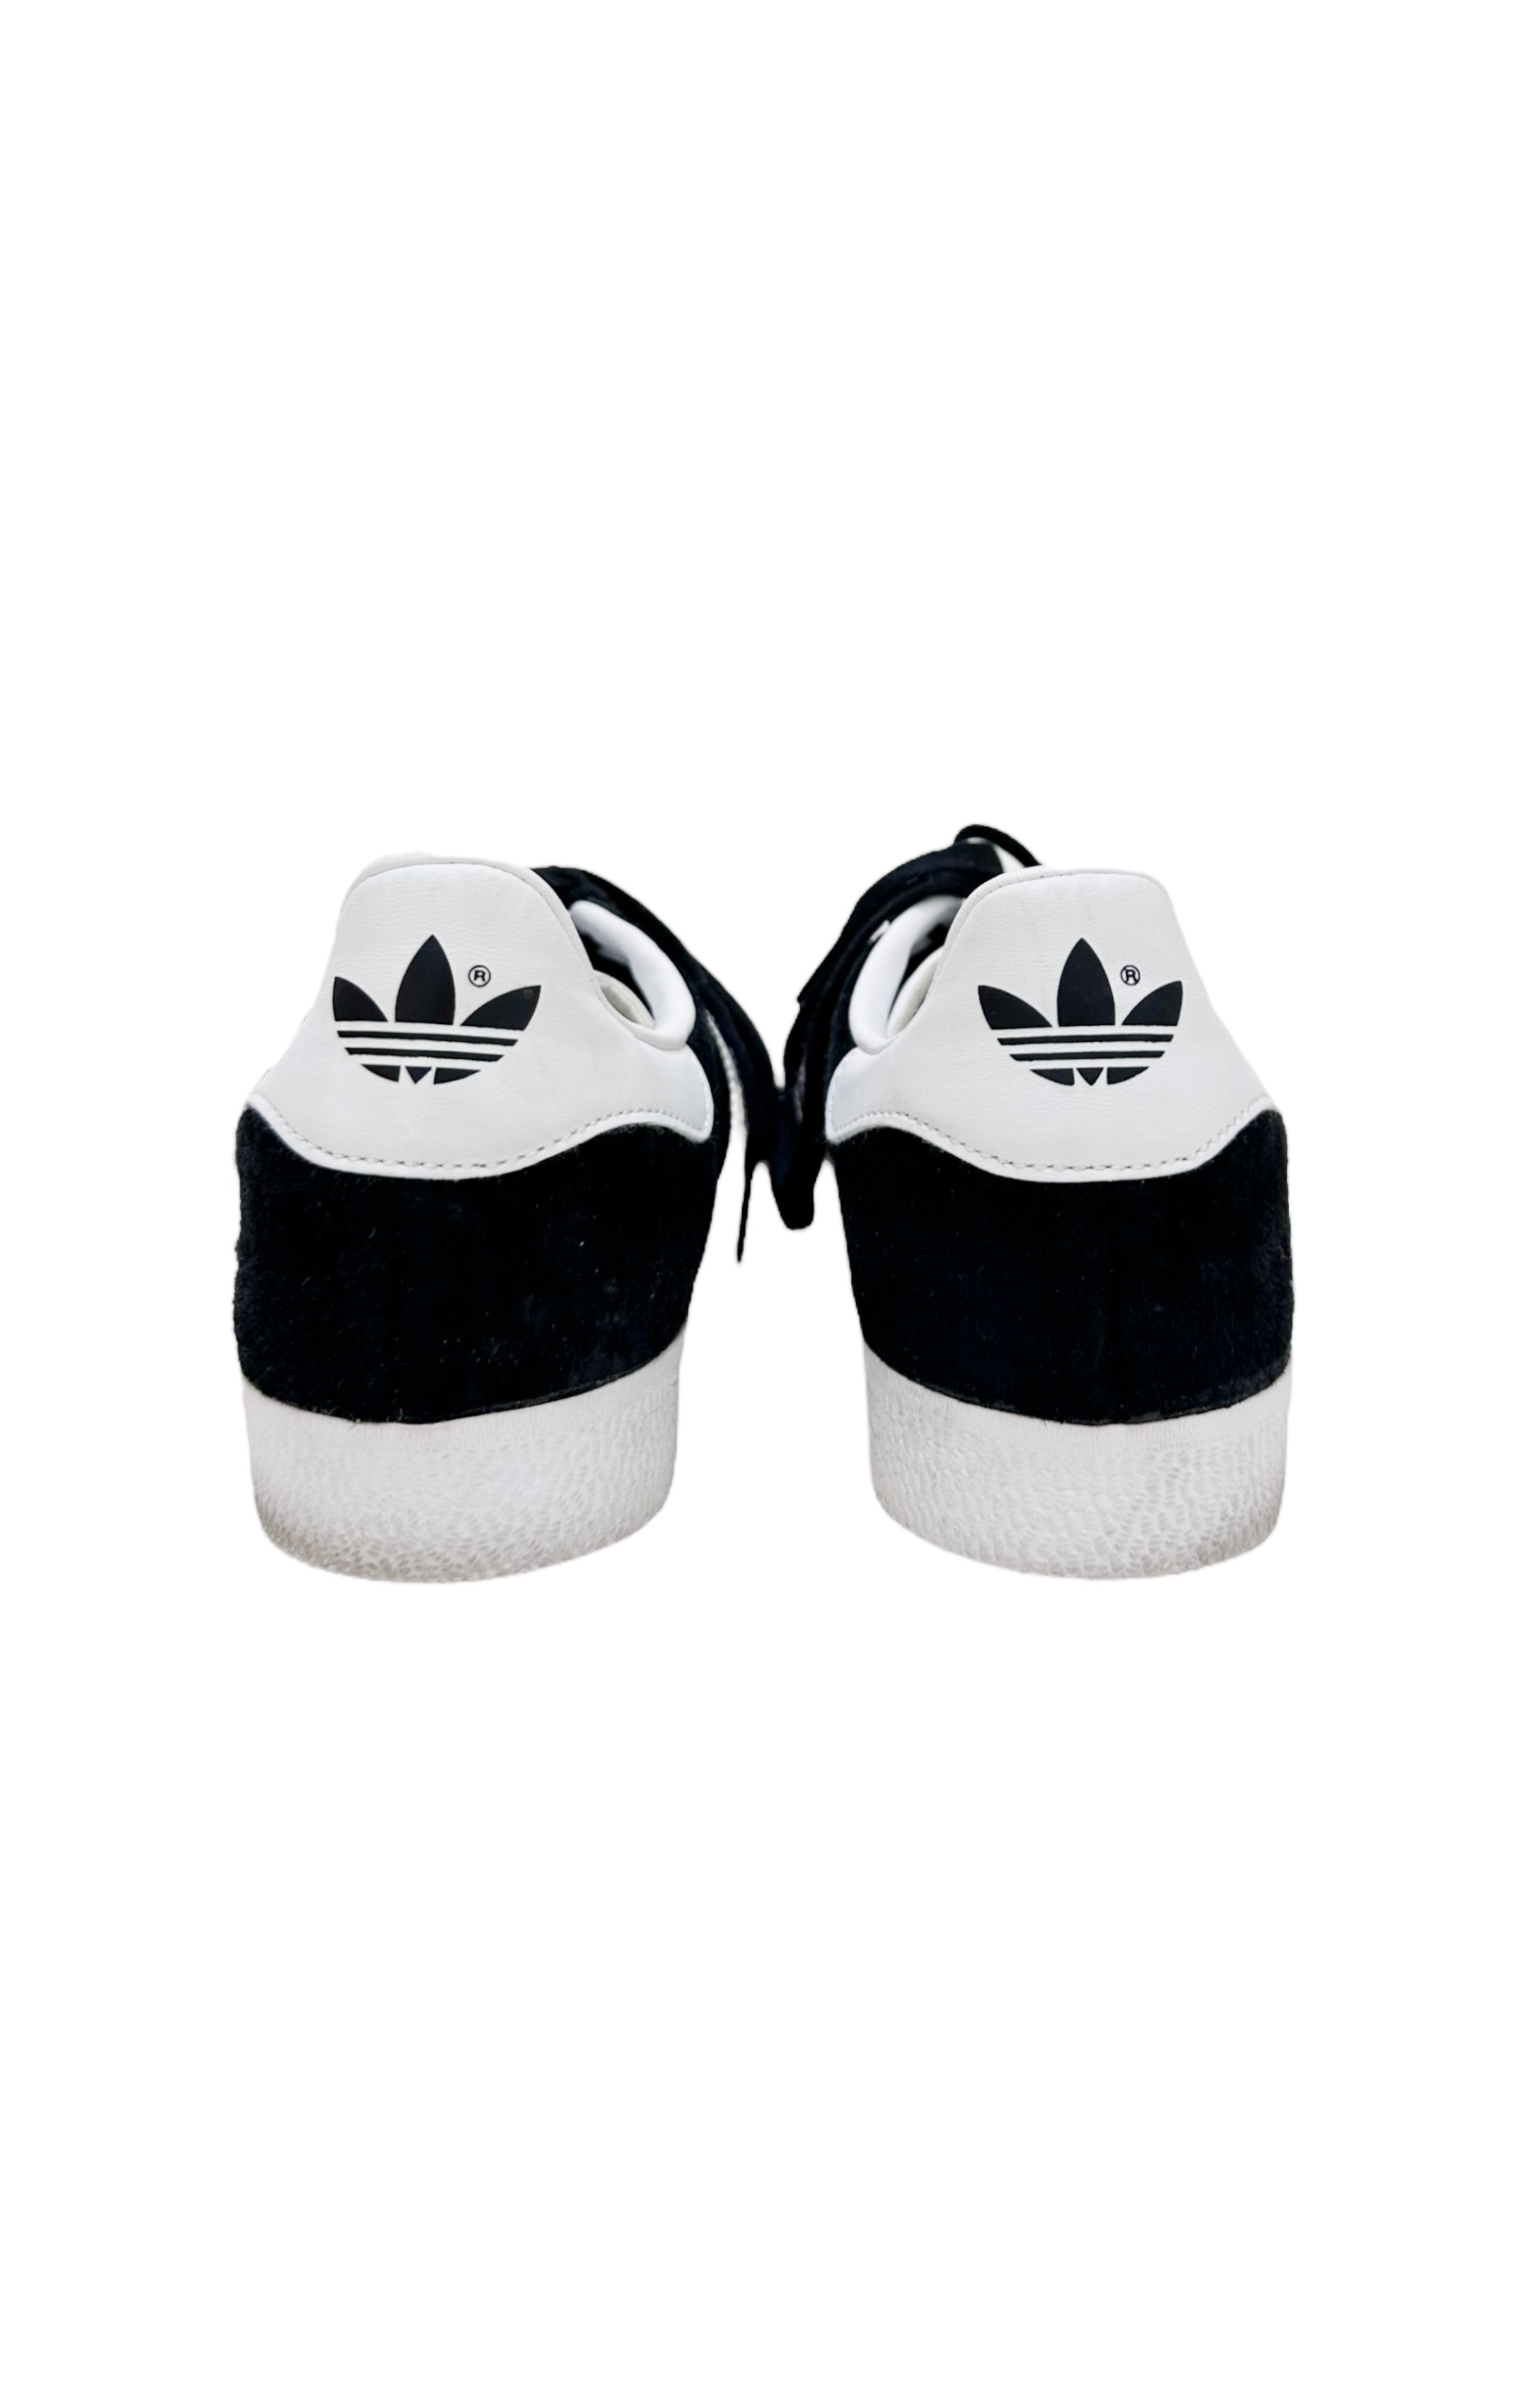 ADIDAS Sneakers Size: Men's US 10